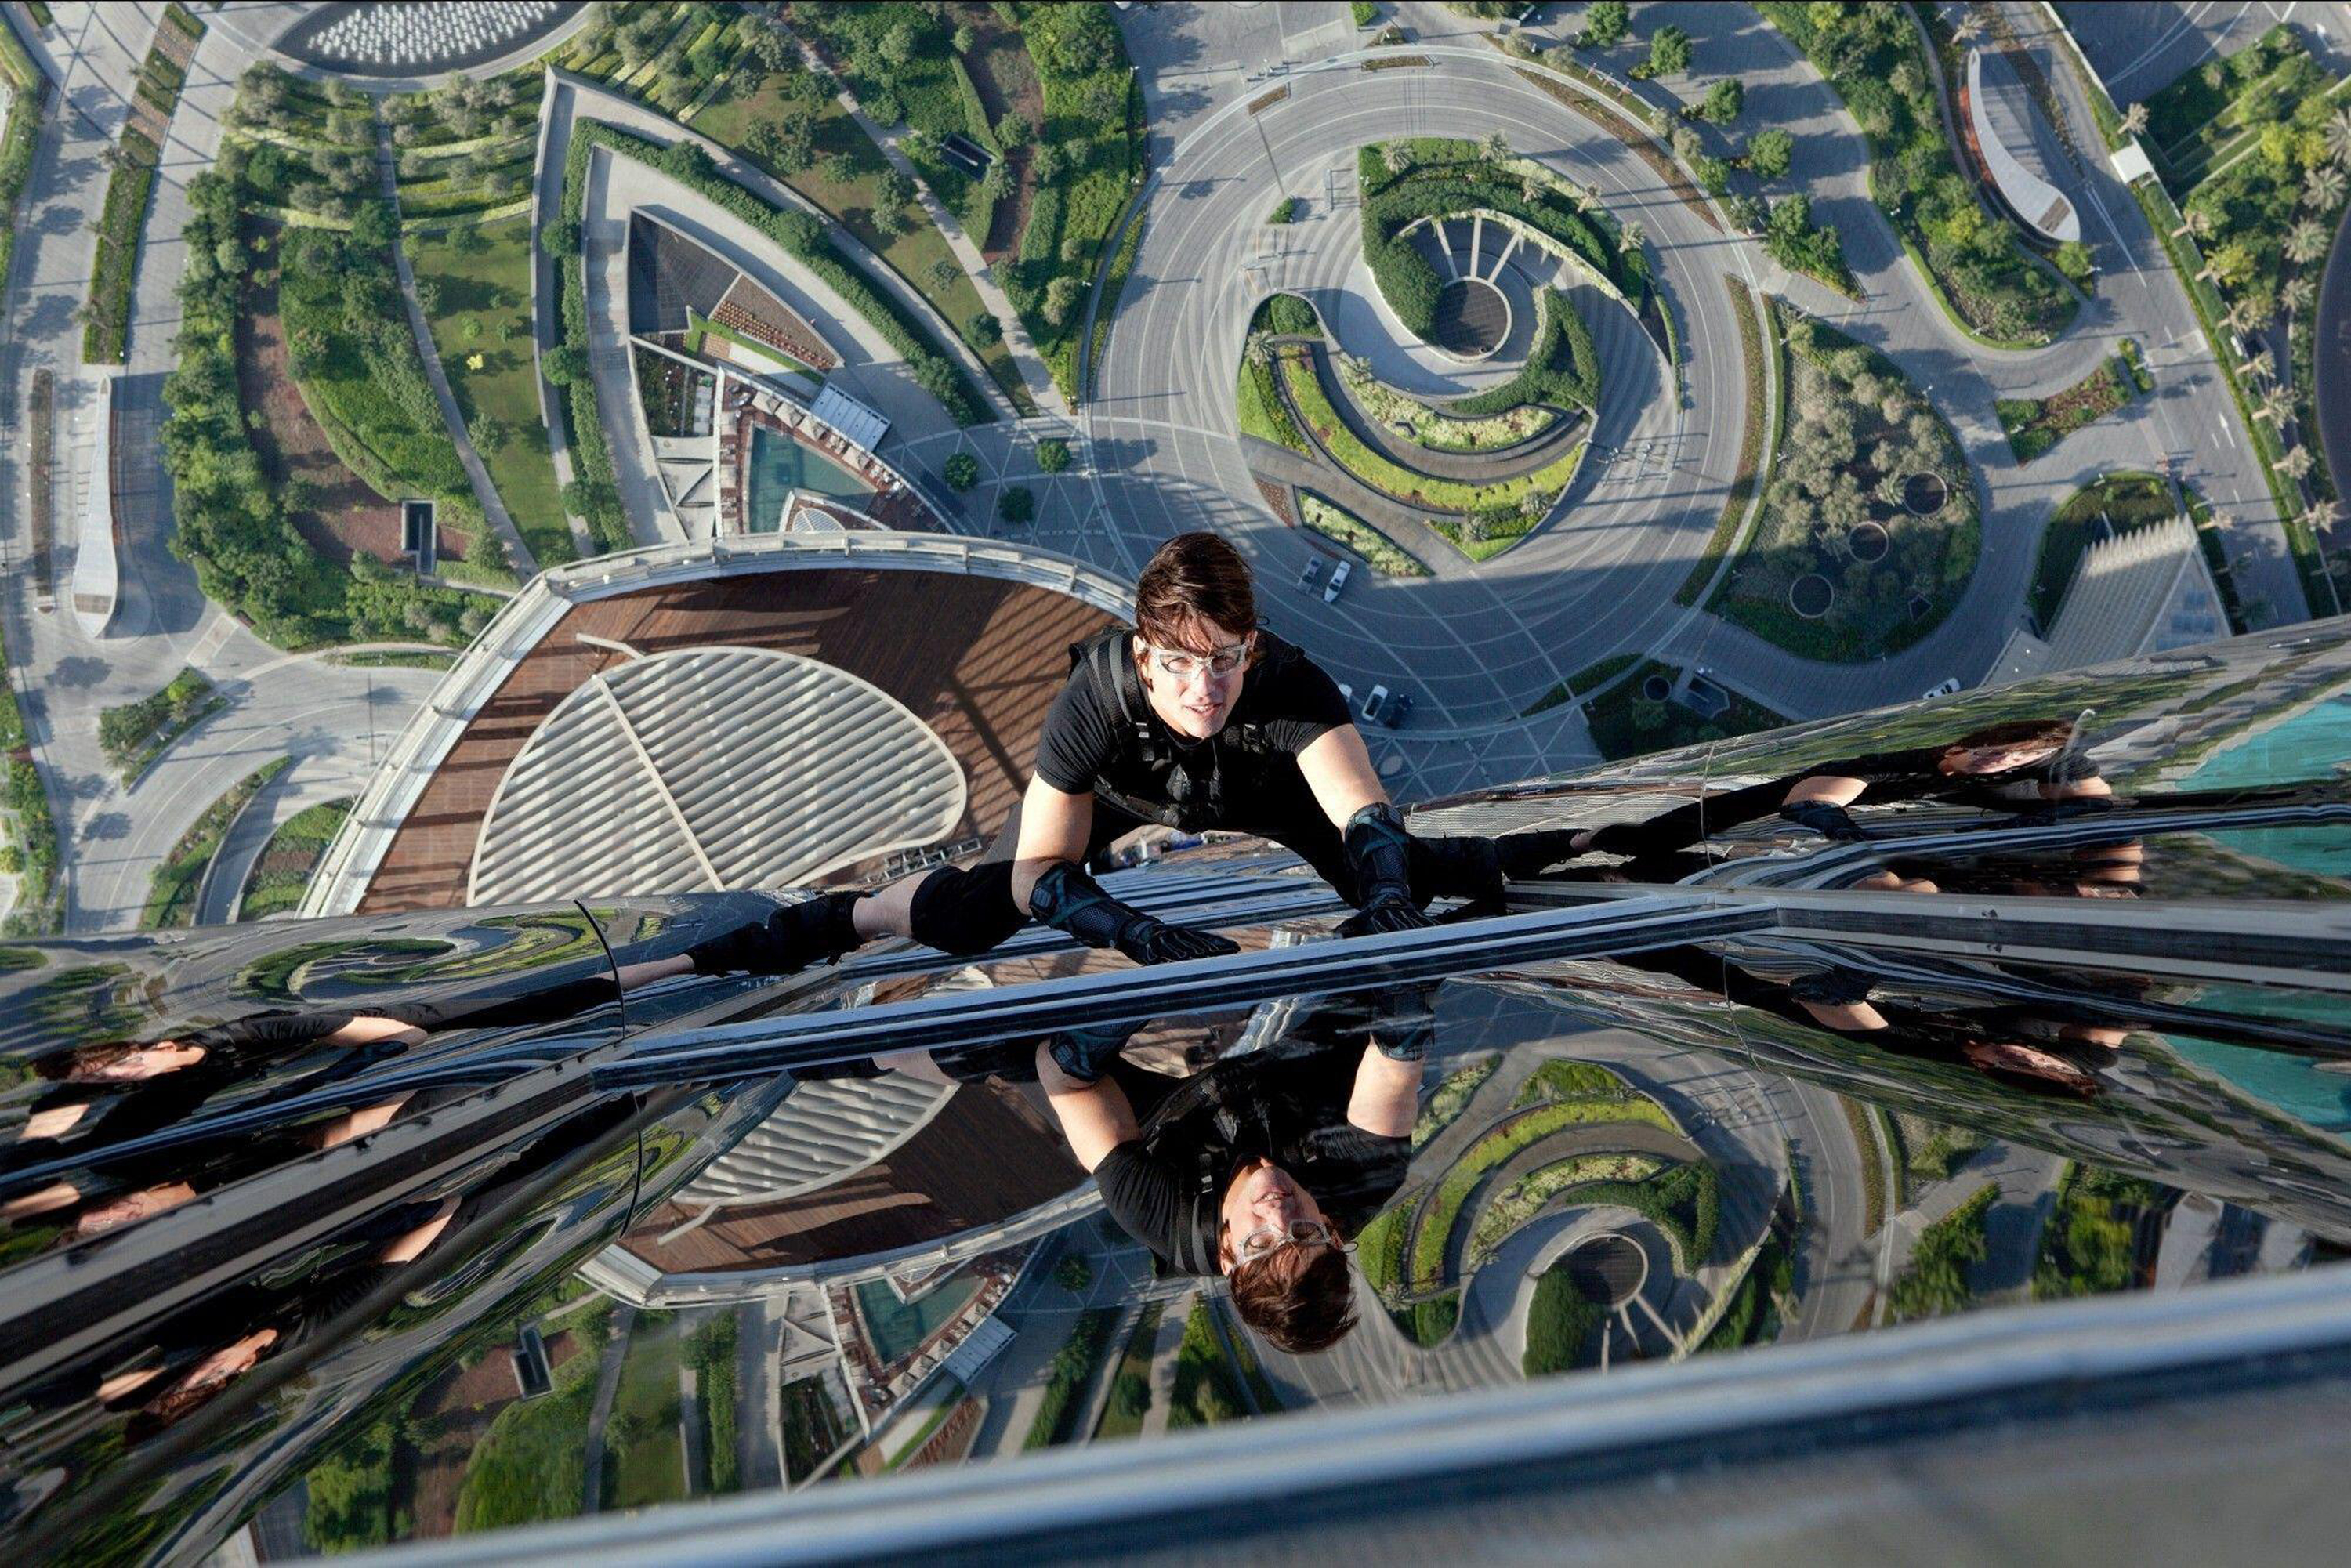 Tom Cruise in Mission Impssoible: Ghost Protocol 